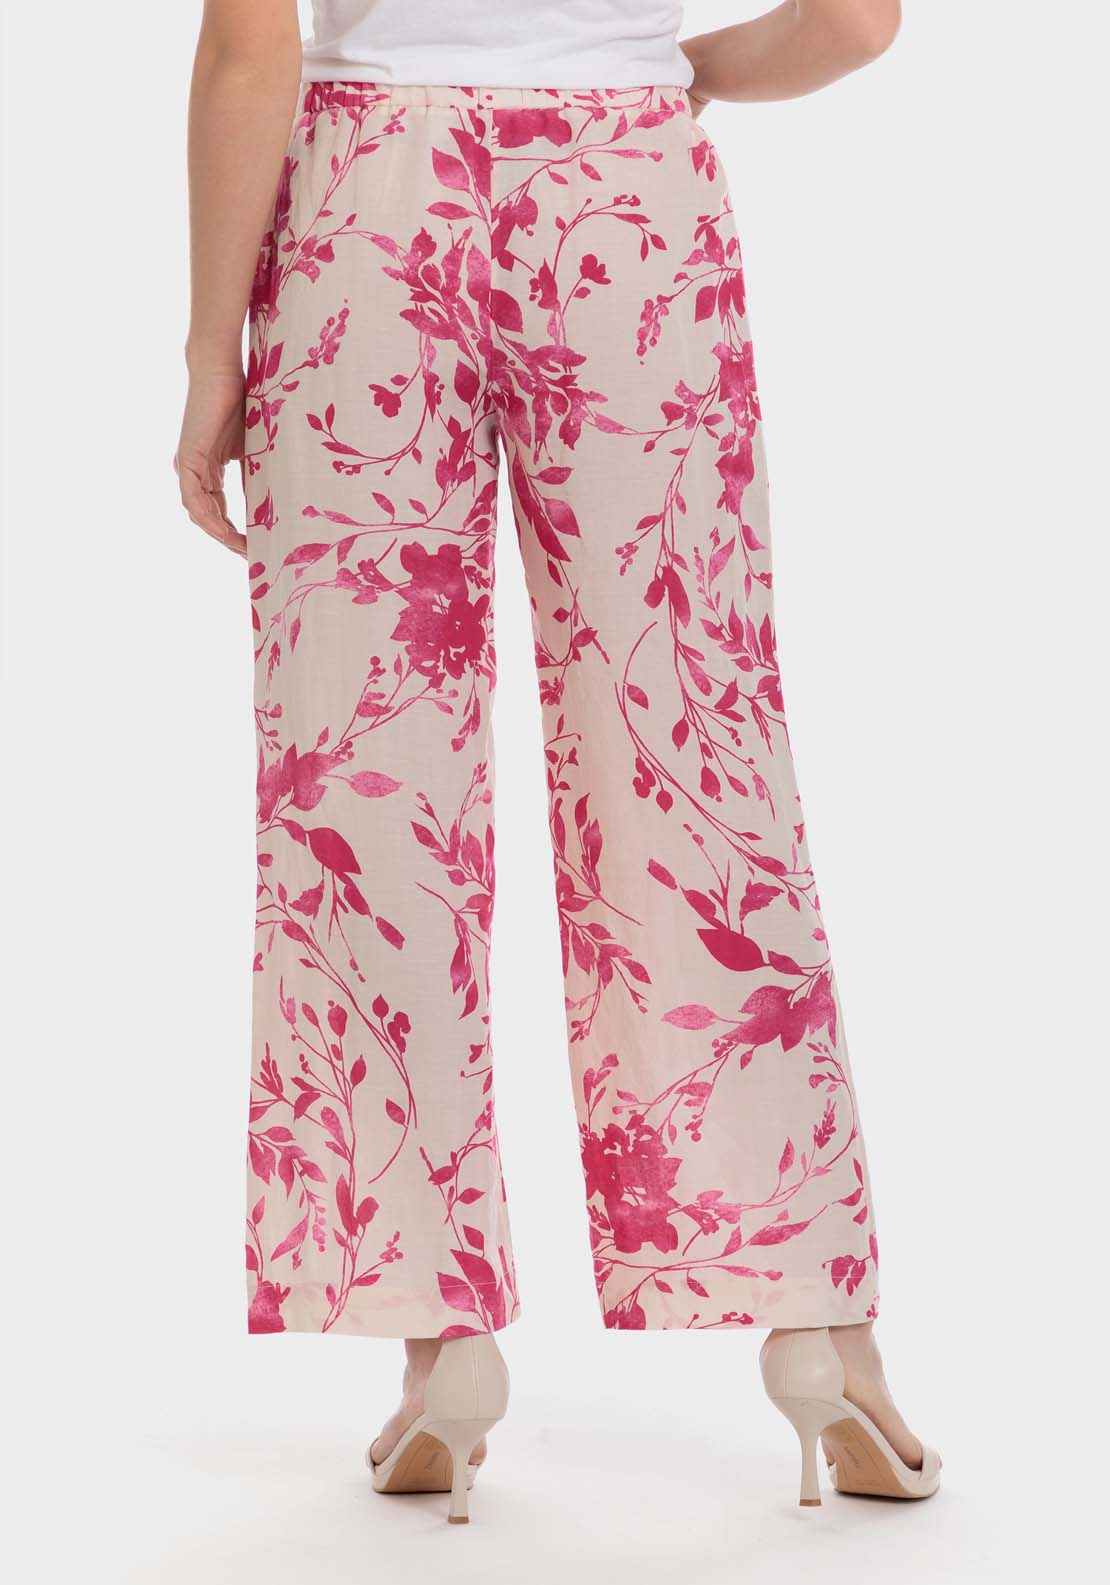 Punt Roma Printed Linen Trouser - Pink 3 Shaws Department Stores